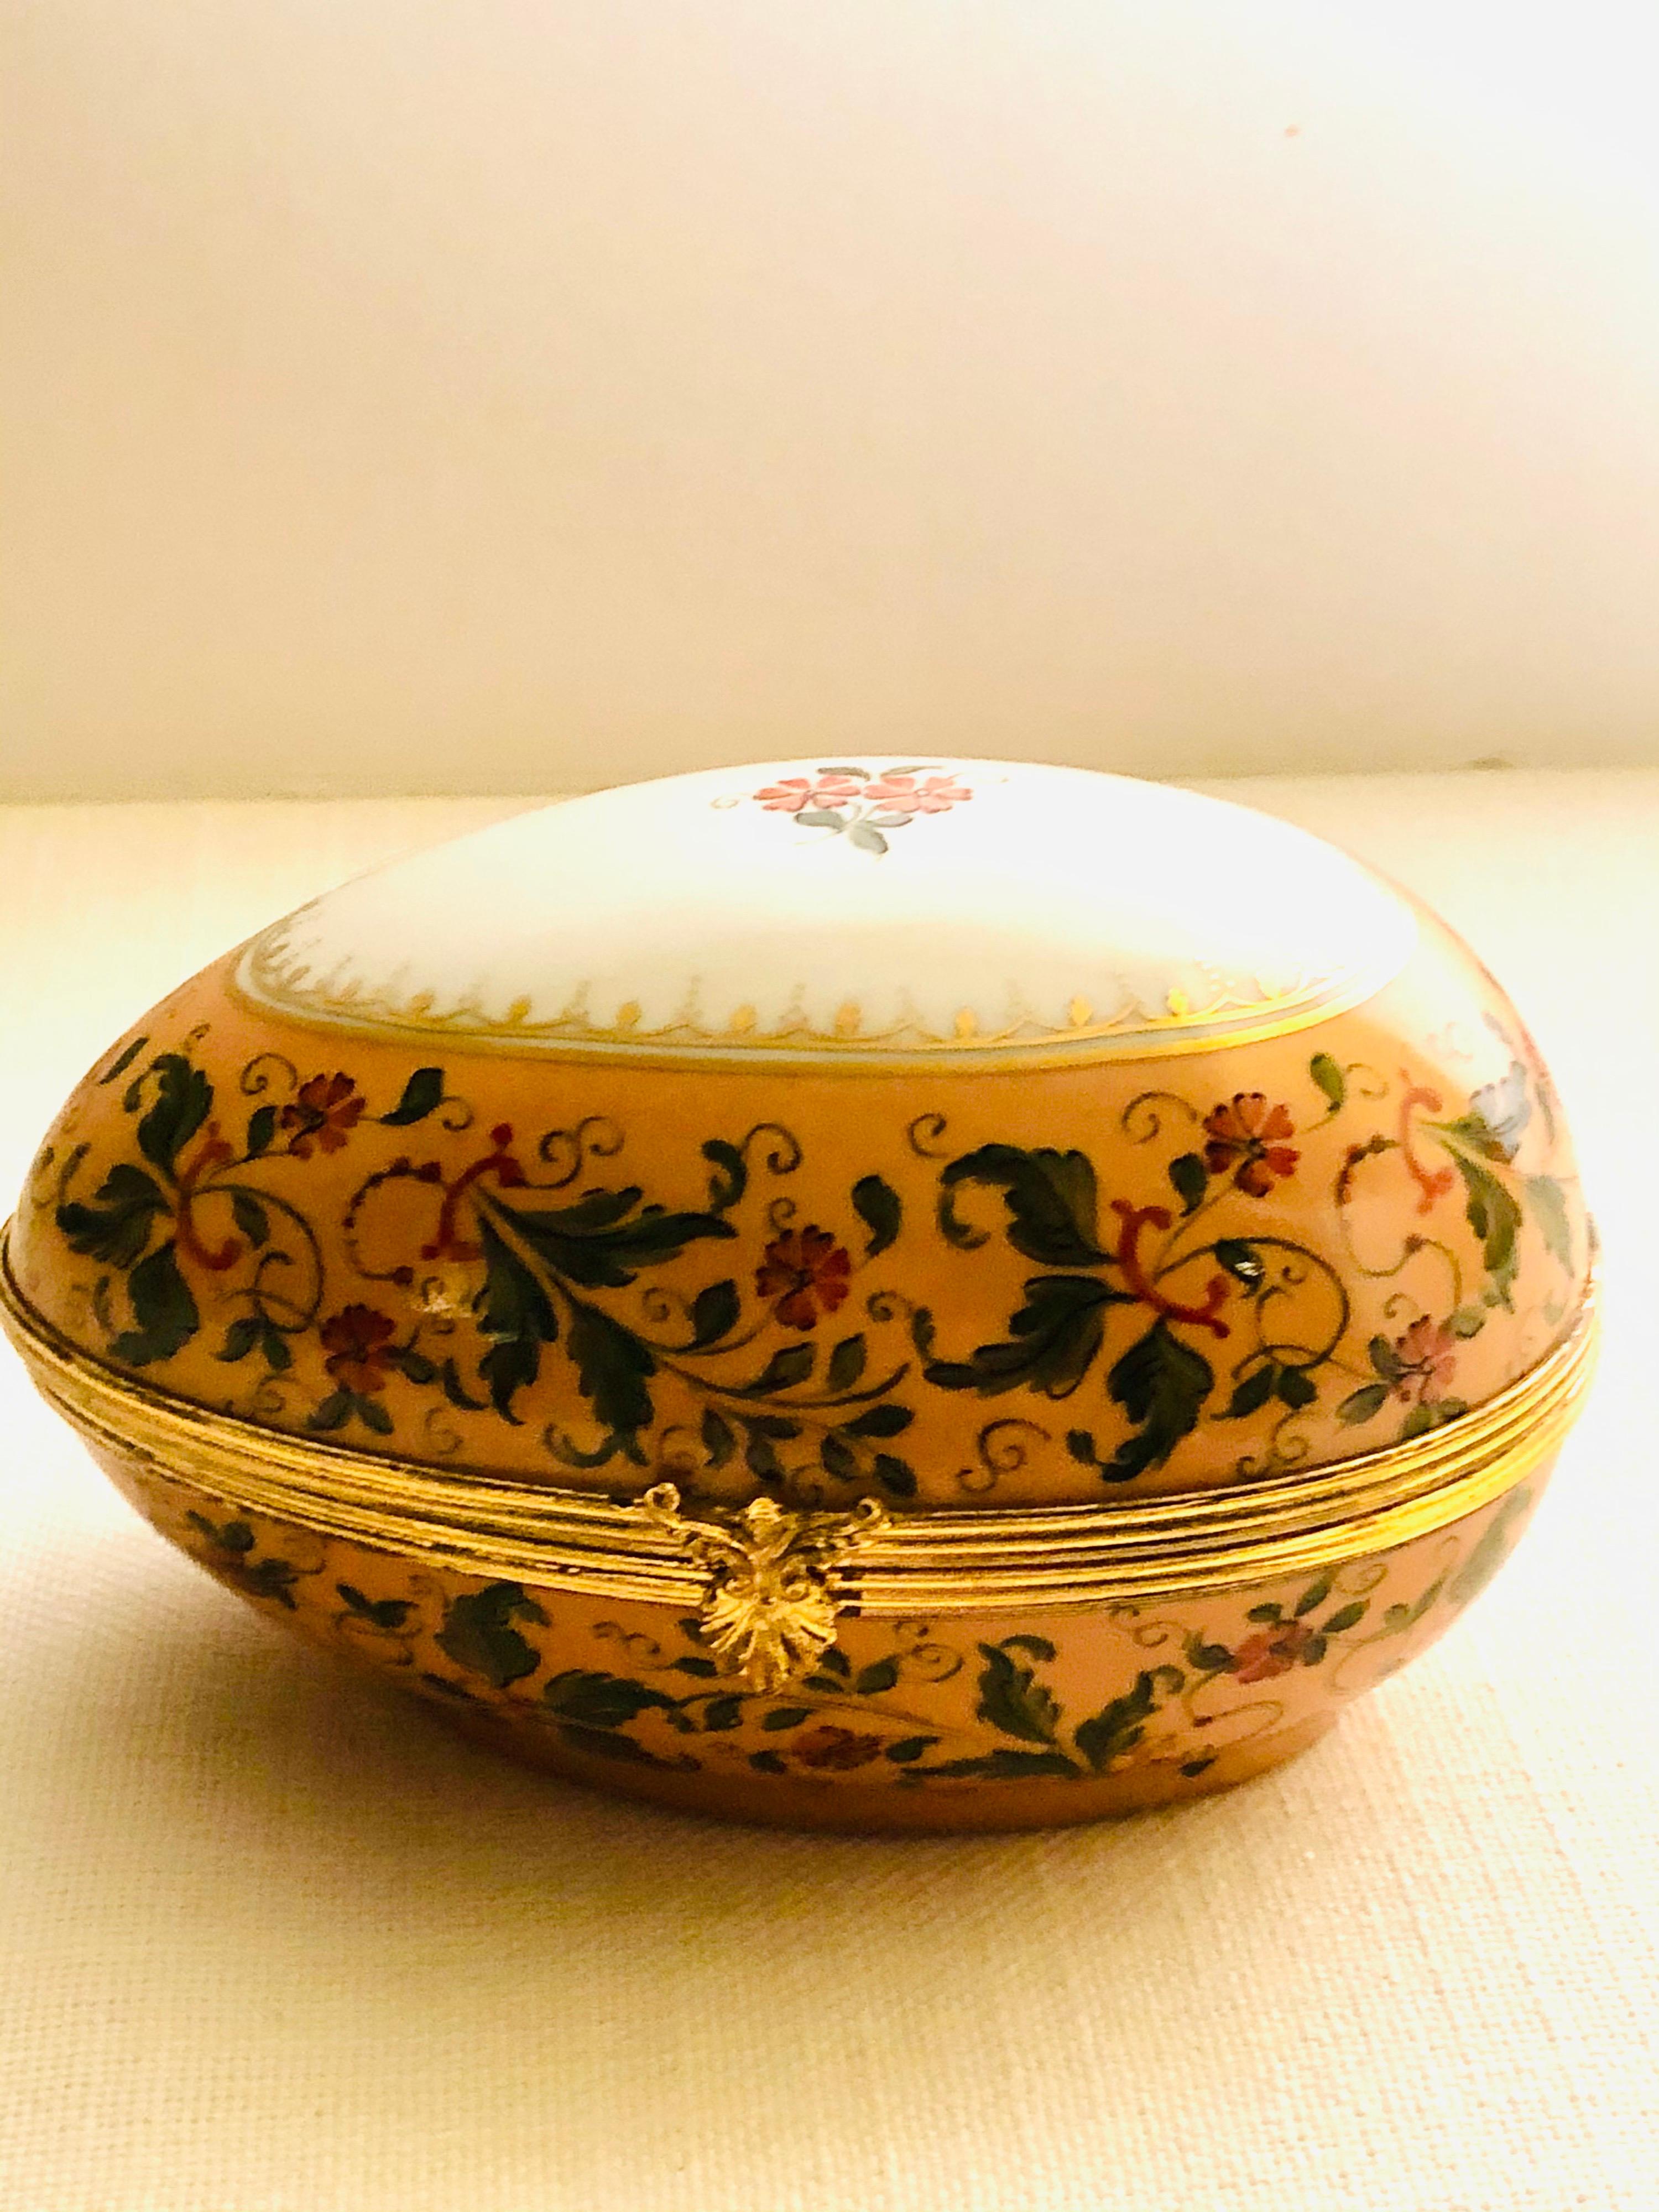 I want to offer you this beautifully painted Le Tallec egg shaped box which is decorated with hand-painted peach flowers and green leaves. This was decorated in the famous studio of Le Tallec, which was later bought by Tiffany and Company. This